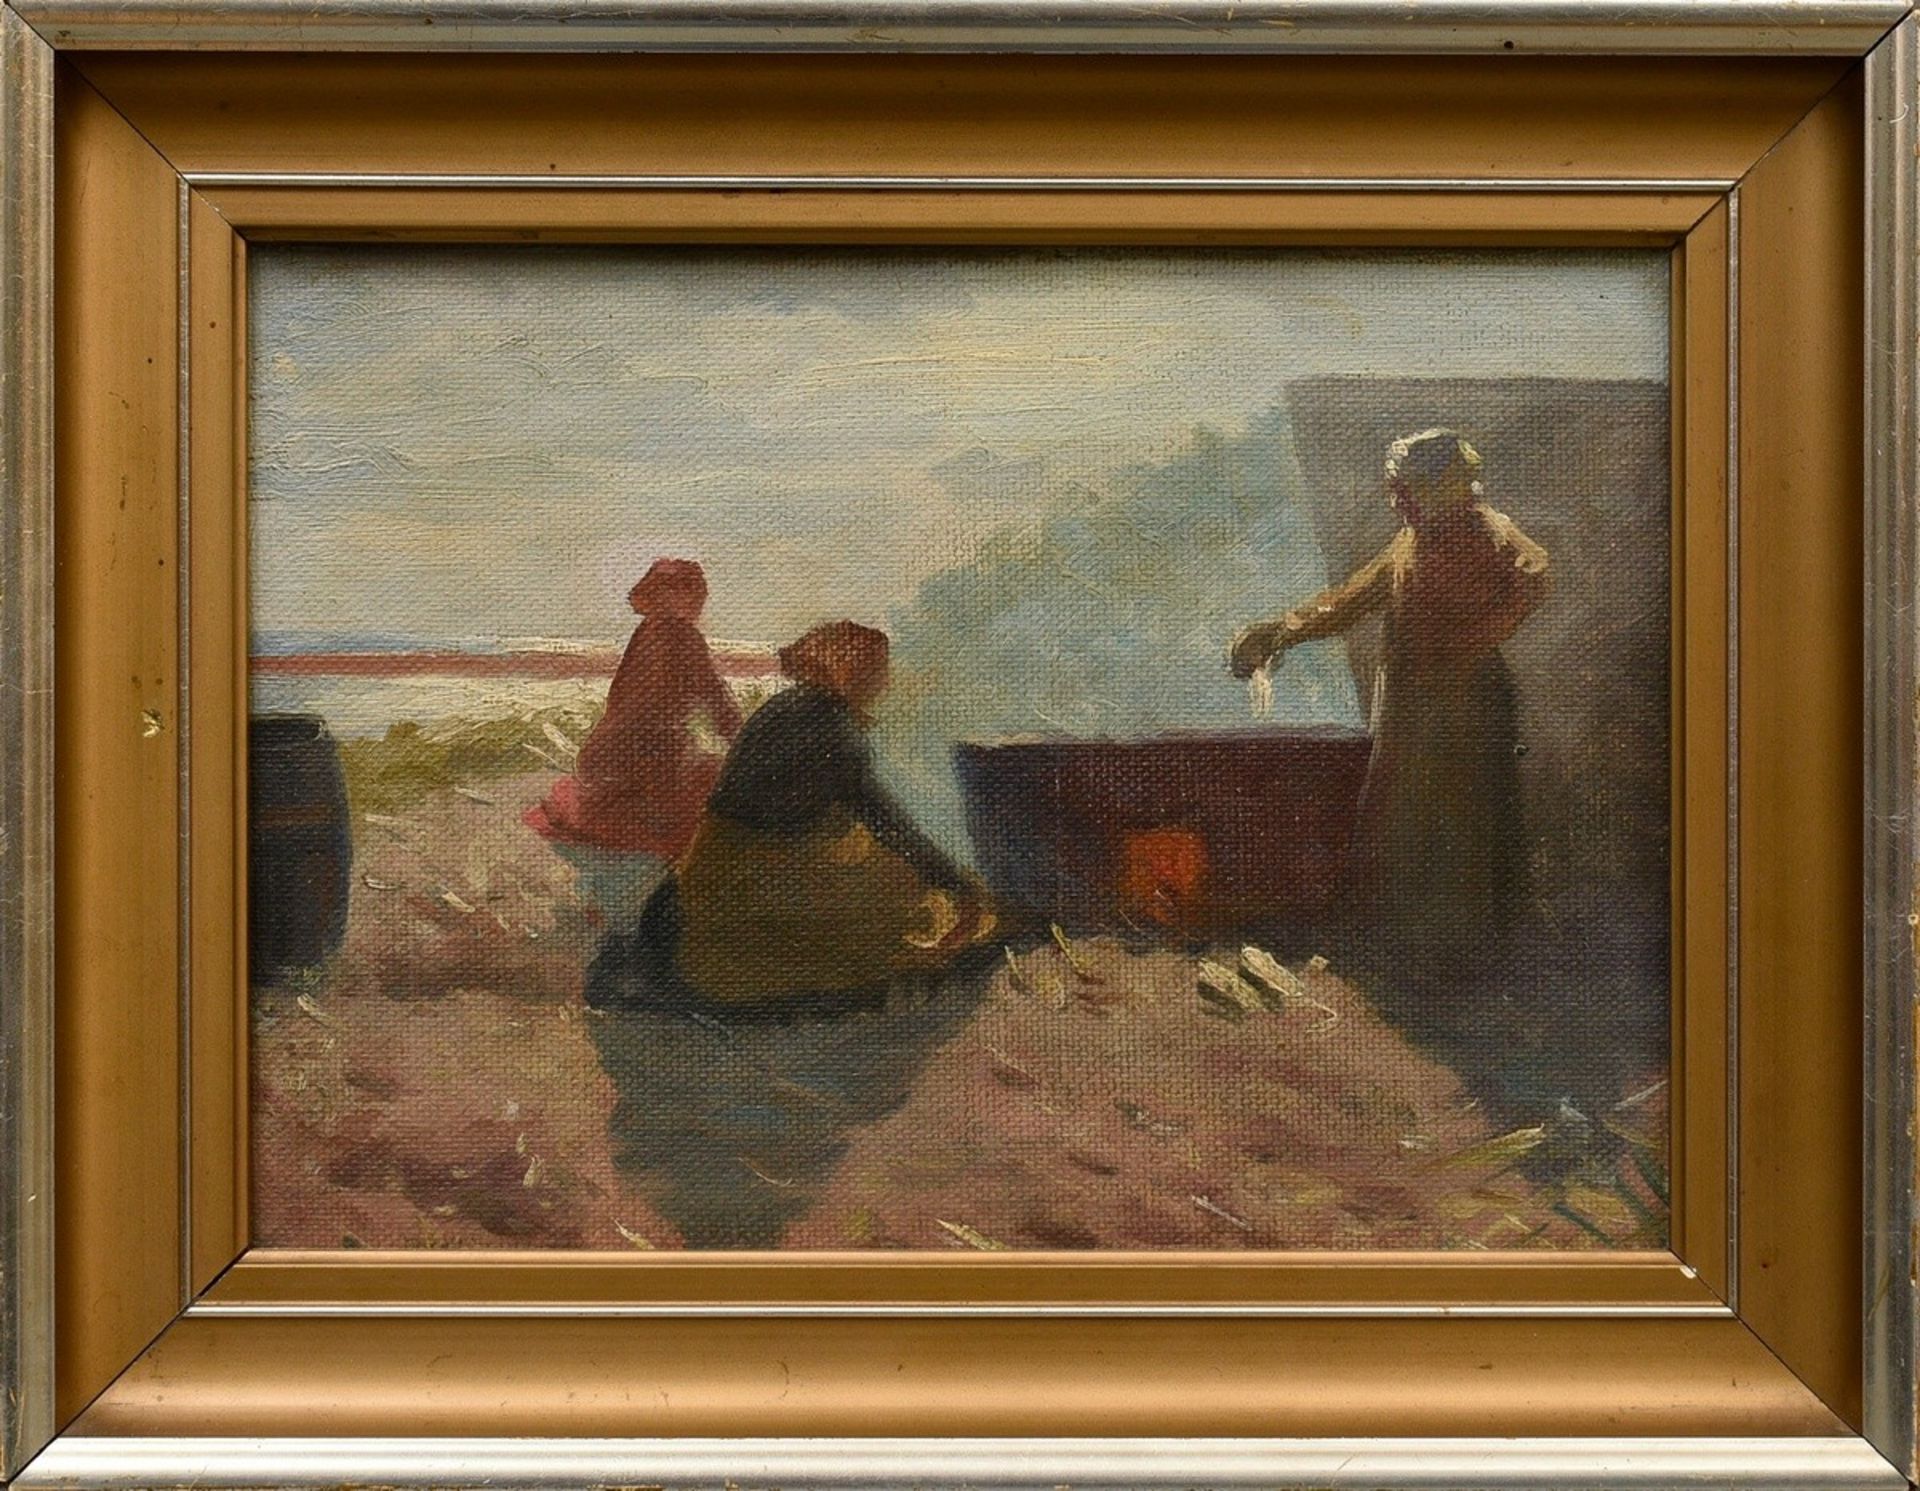 Tuxen, Laurits (1853-1927) attr. "Cooking with wood at Harboøre" (Trenkogning af Harboøre), oil/can - Image 2 of 5